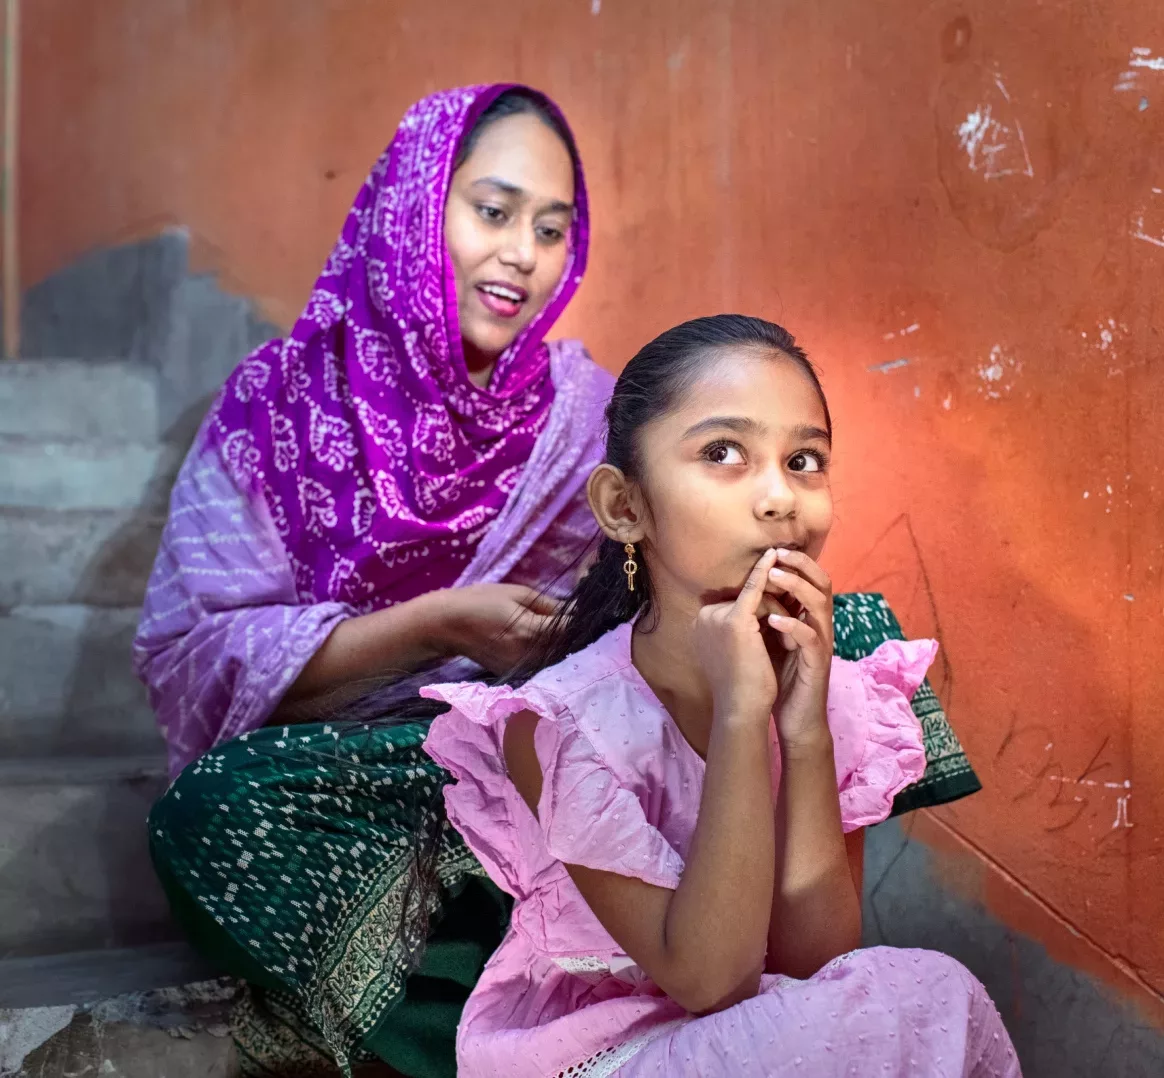 Ruma Akter braids her daughter’s hair while they both sit outside on steps.